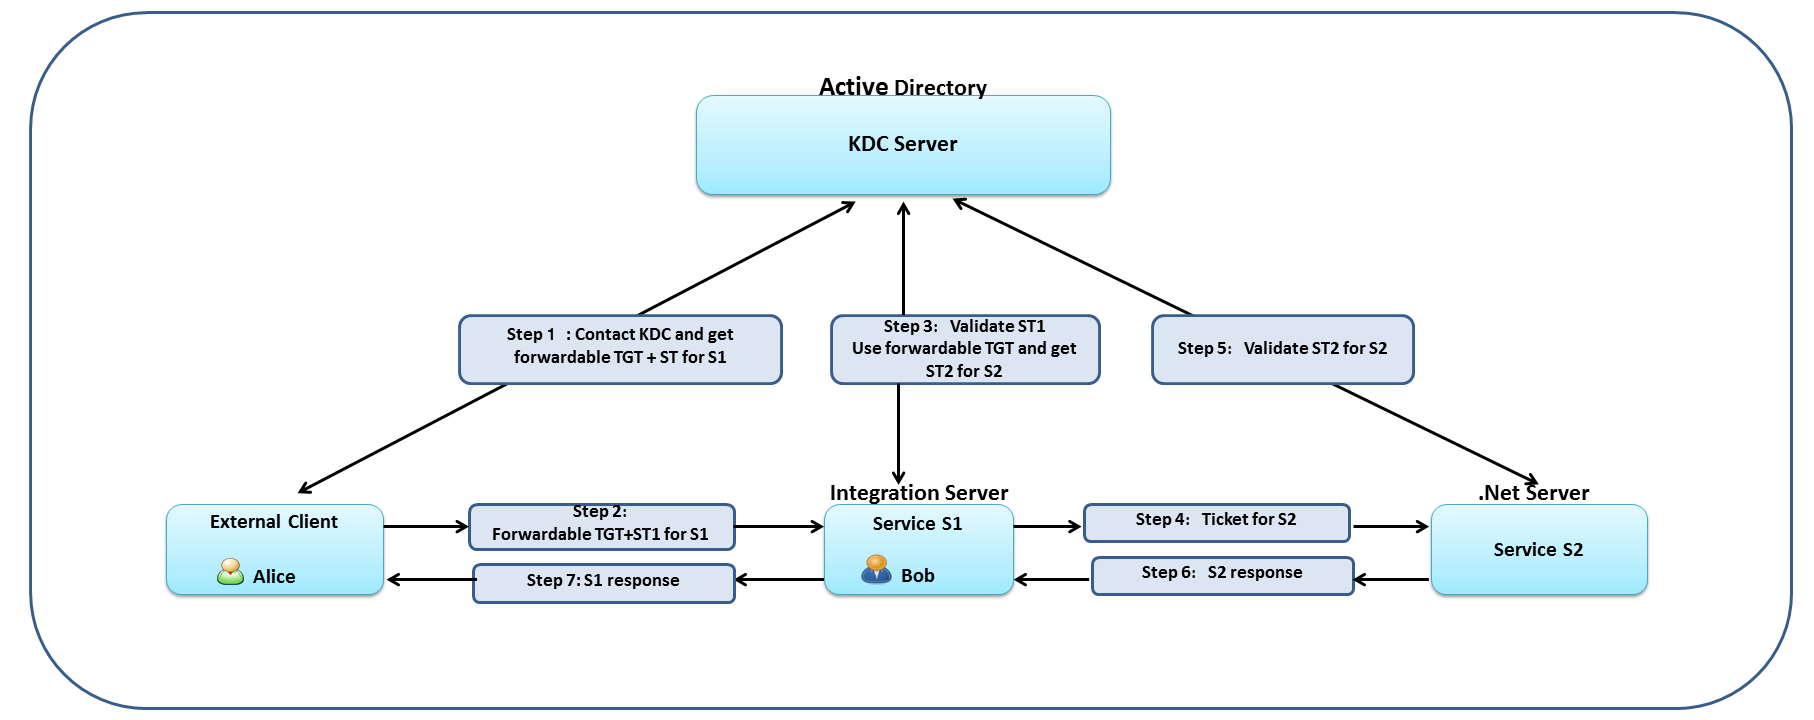 an example use case that describes the steps involved in Kerberos delegated authentication